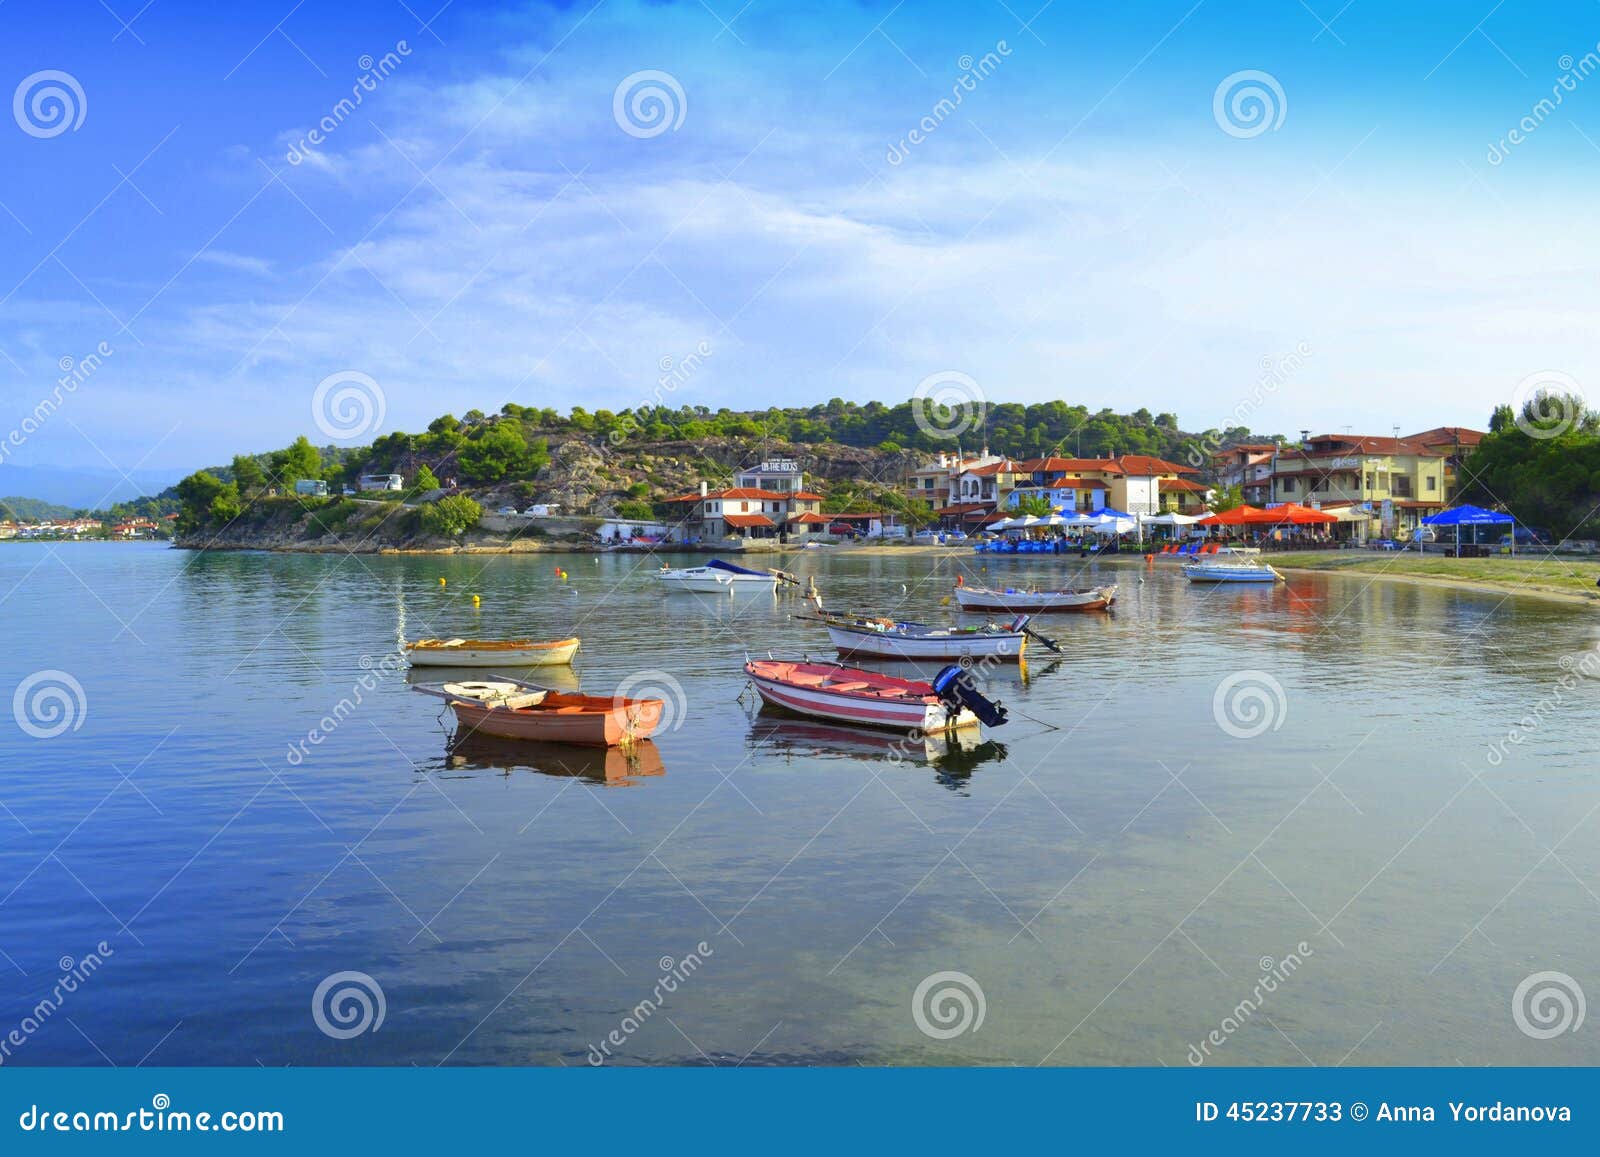 Picturesque Boats Beach Greece Editorial Stock Photo - Image of blue ...